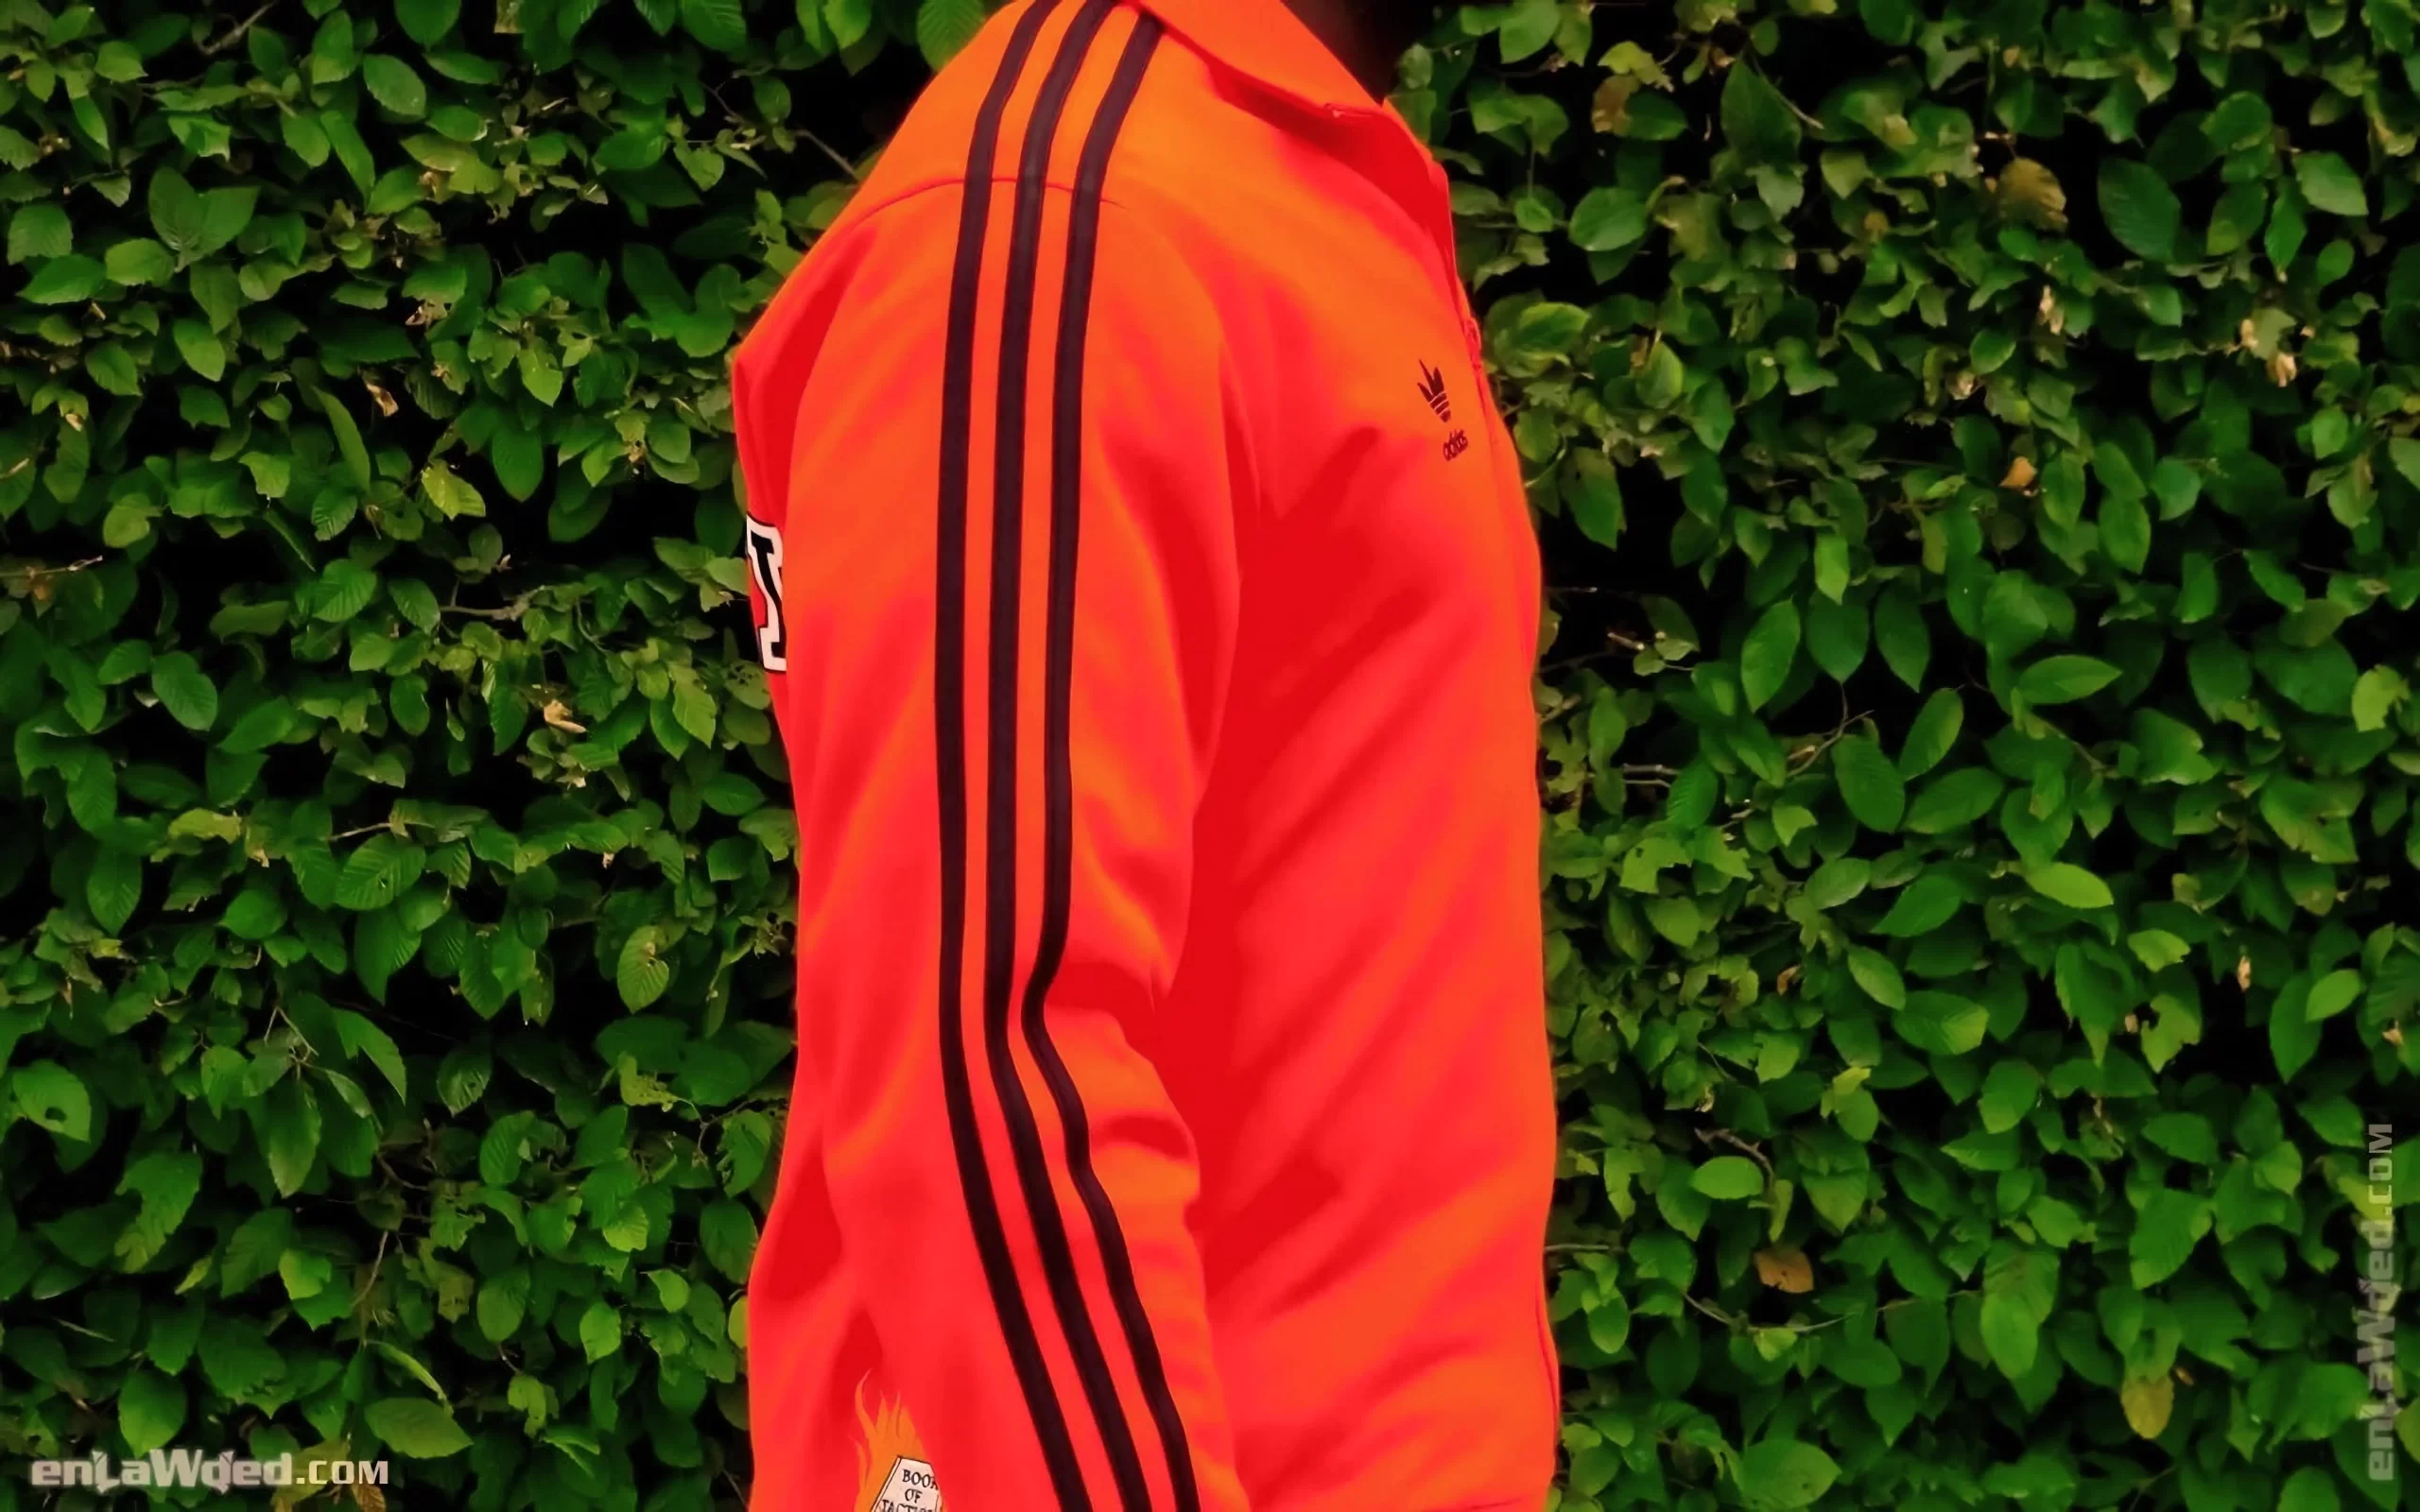 Men’s 2005 Netherlands ’74 Total Football TT by Adidas: Conscientious (EnLawded.com file #lmc476mg44be676ihwq)